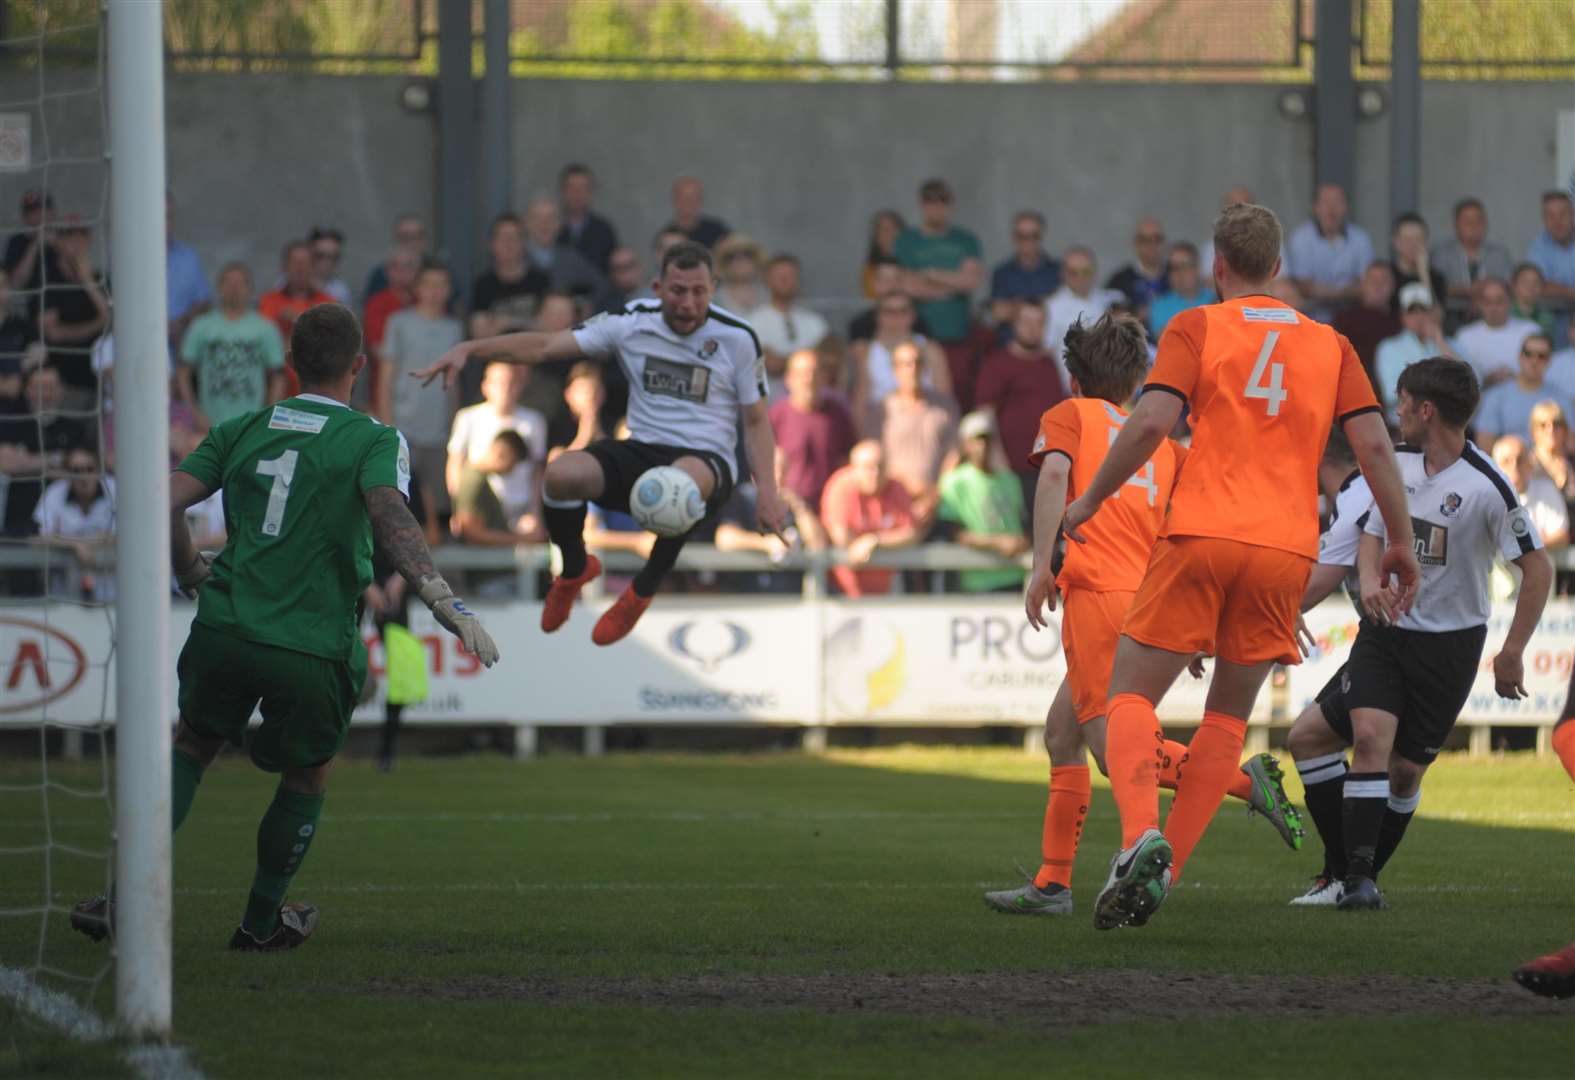 Ryan Hayes missed with this volley Picture: Steve Crispe